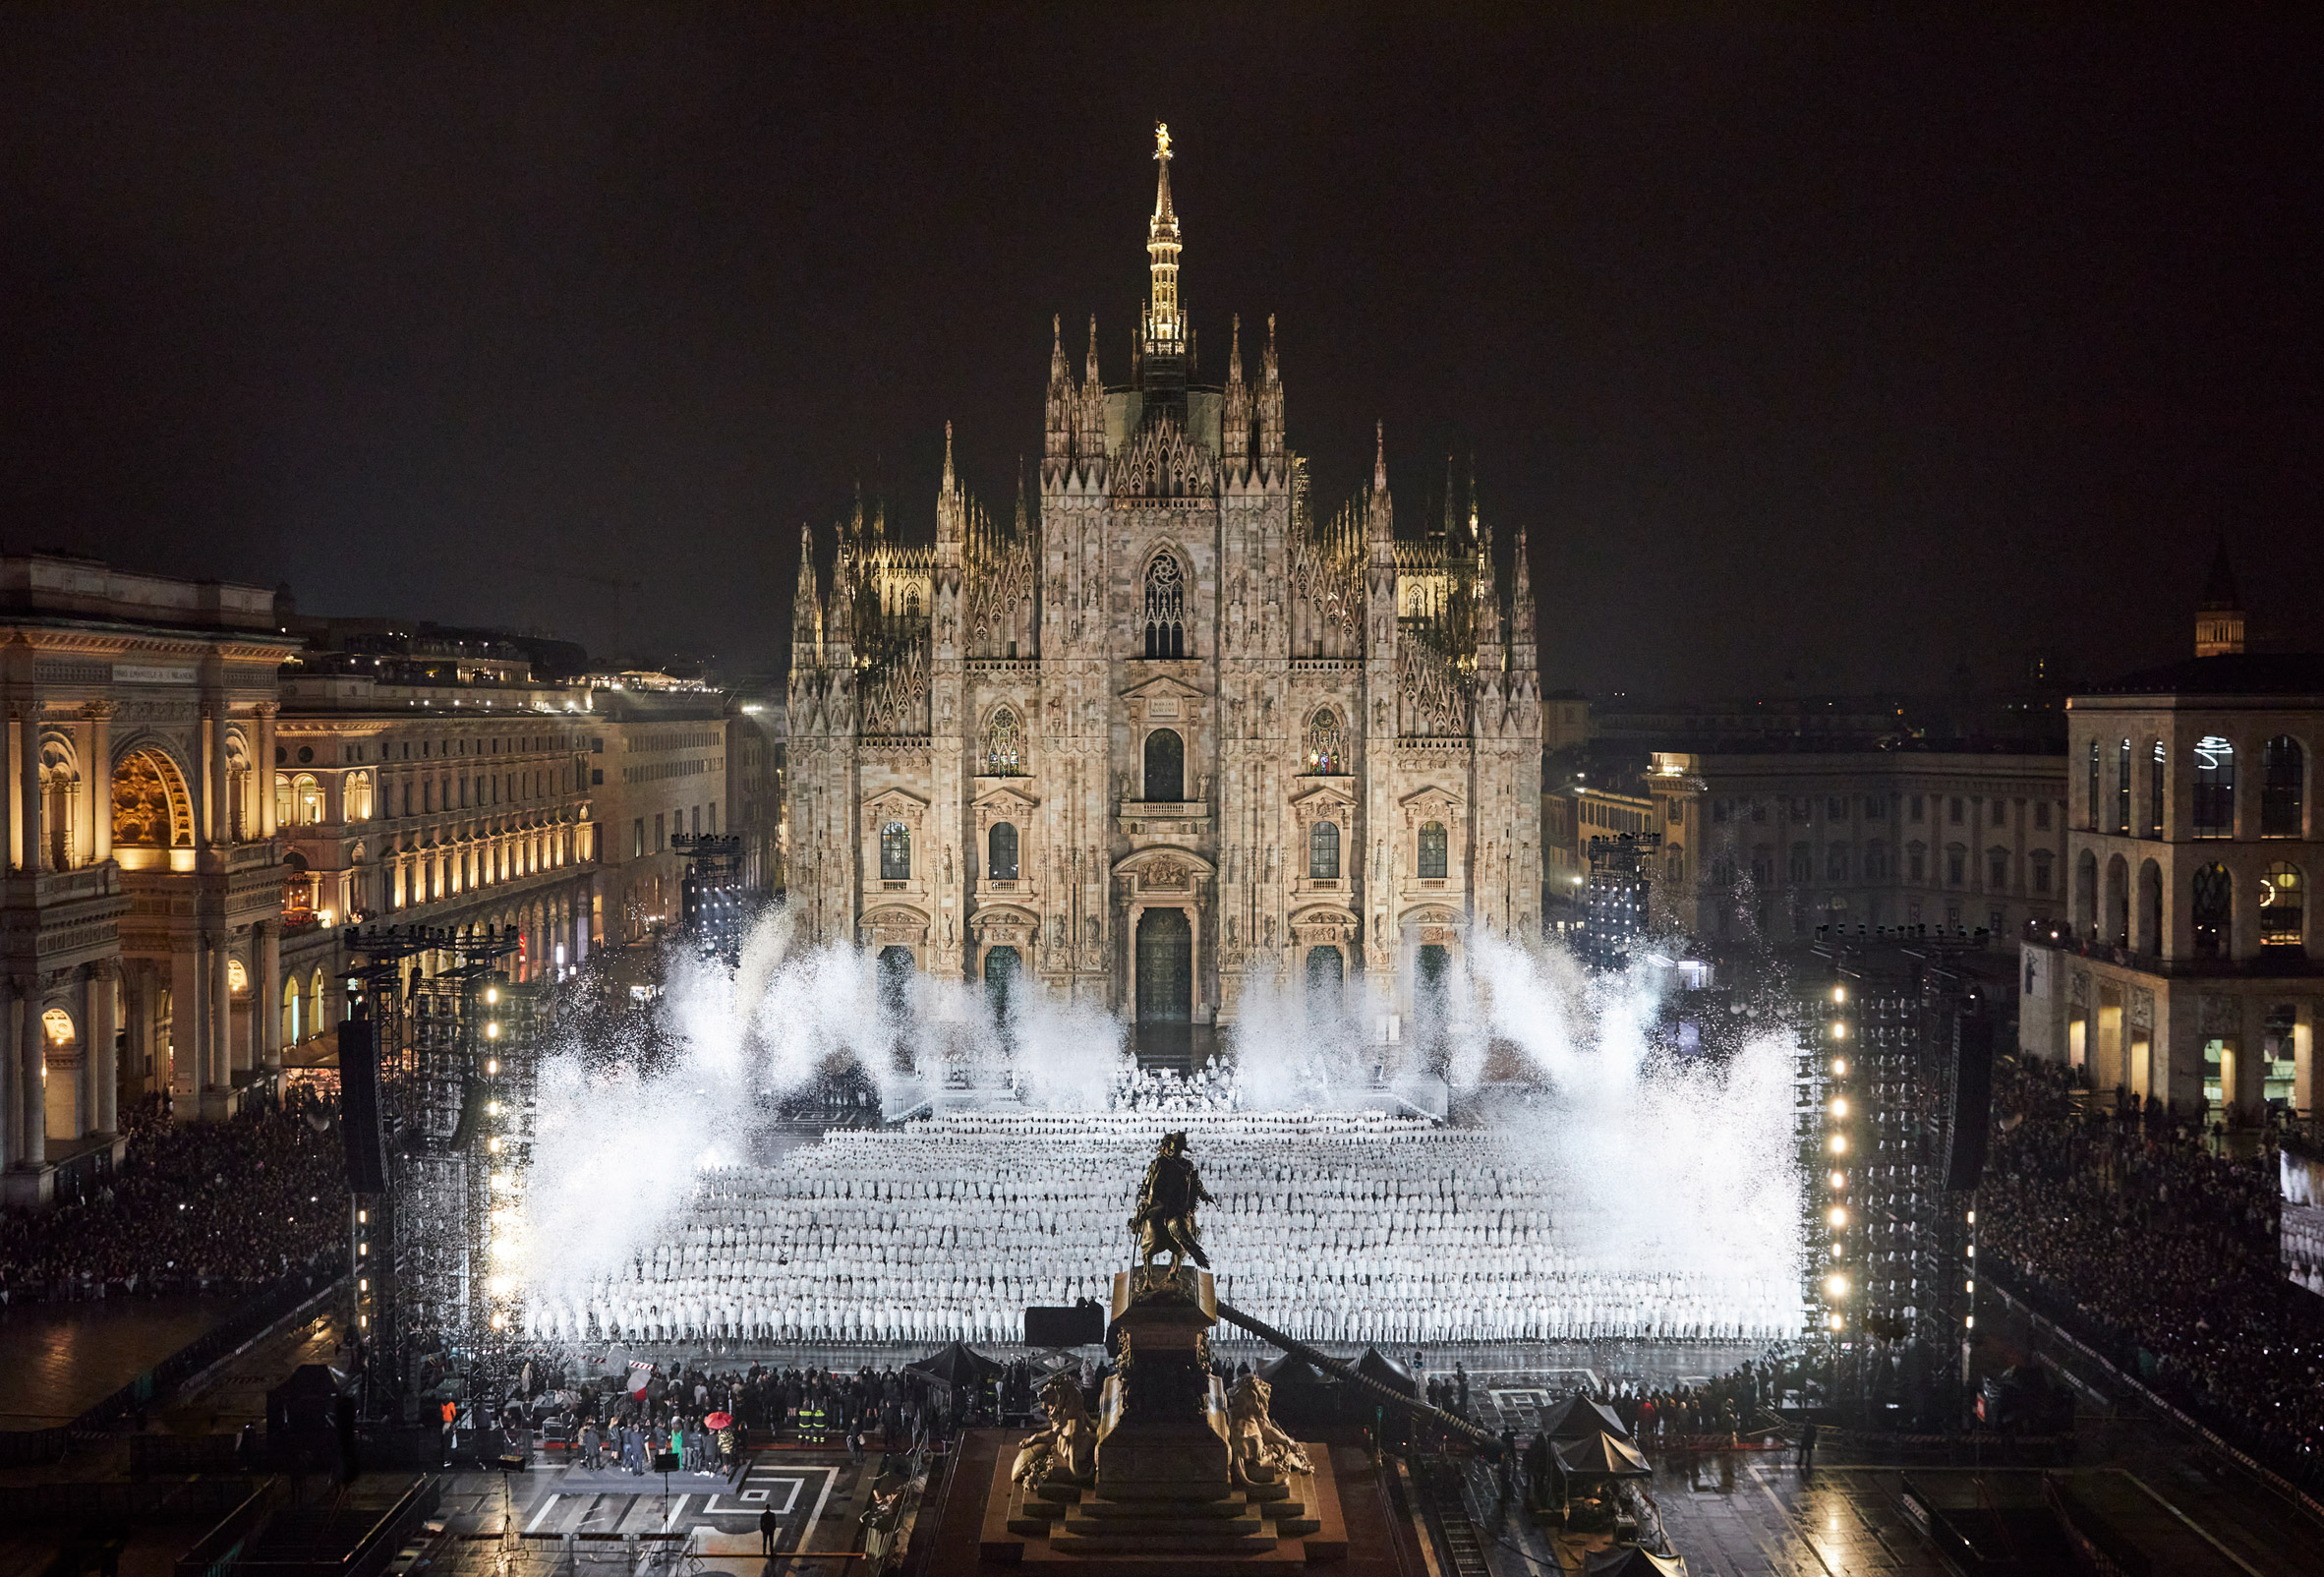 Aerial photo of the Moncler show in front of the Piazza del Duomo in Milan